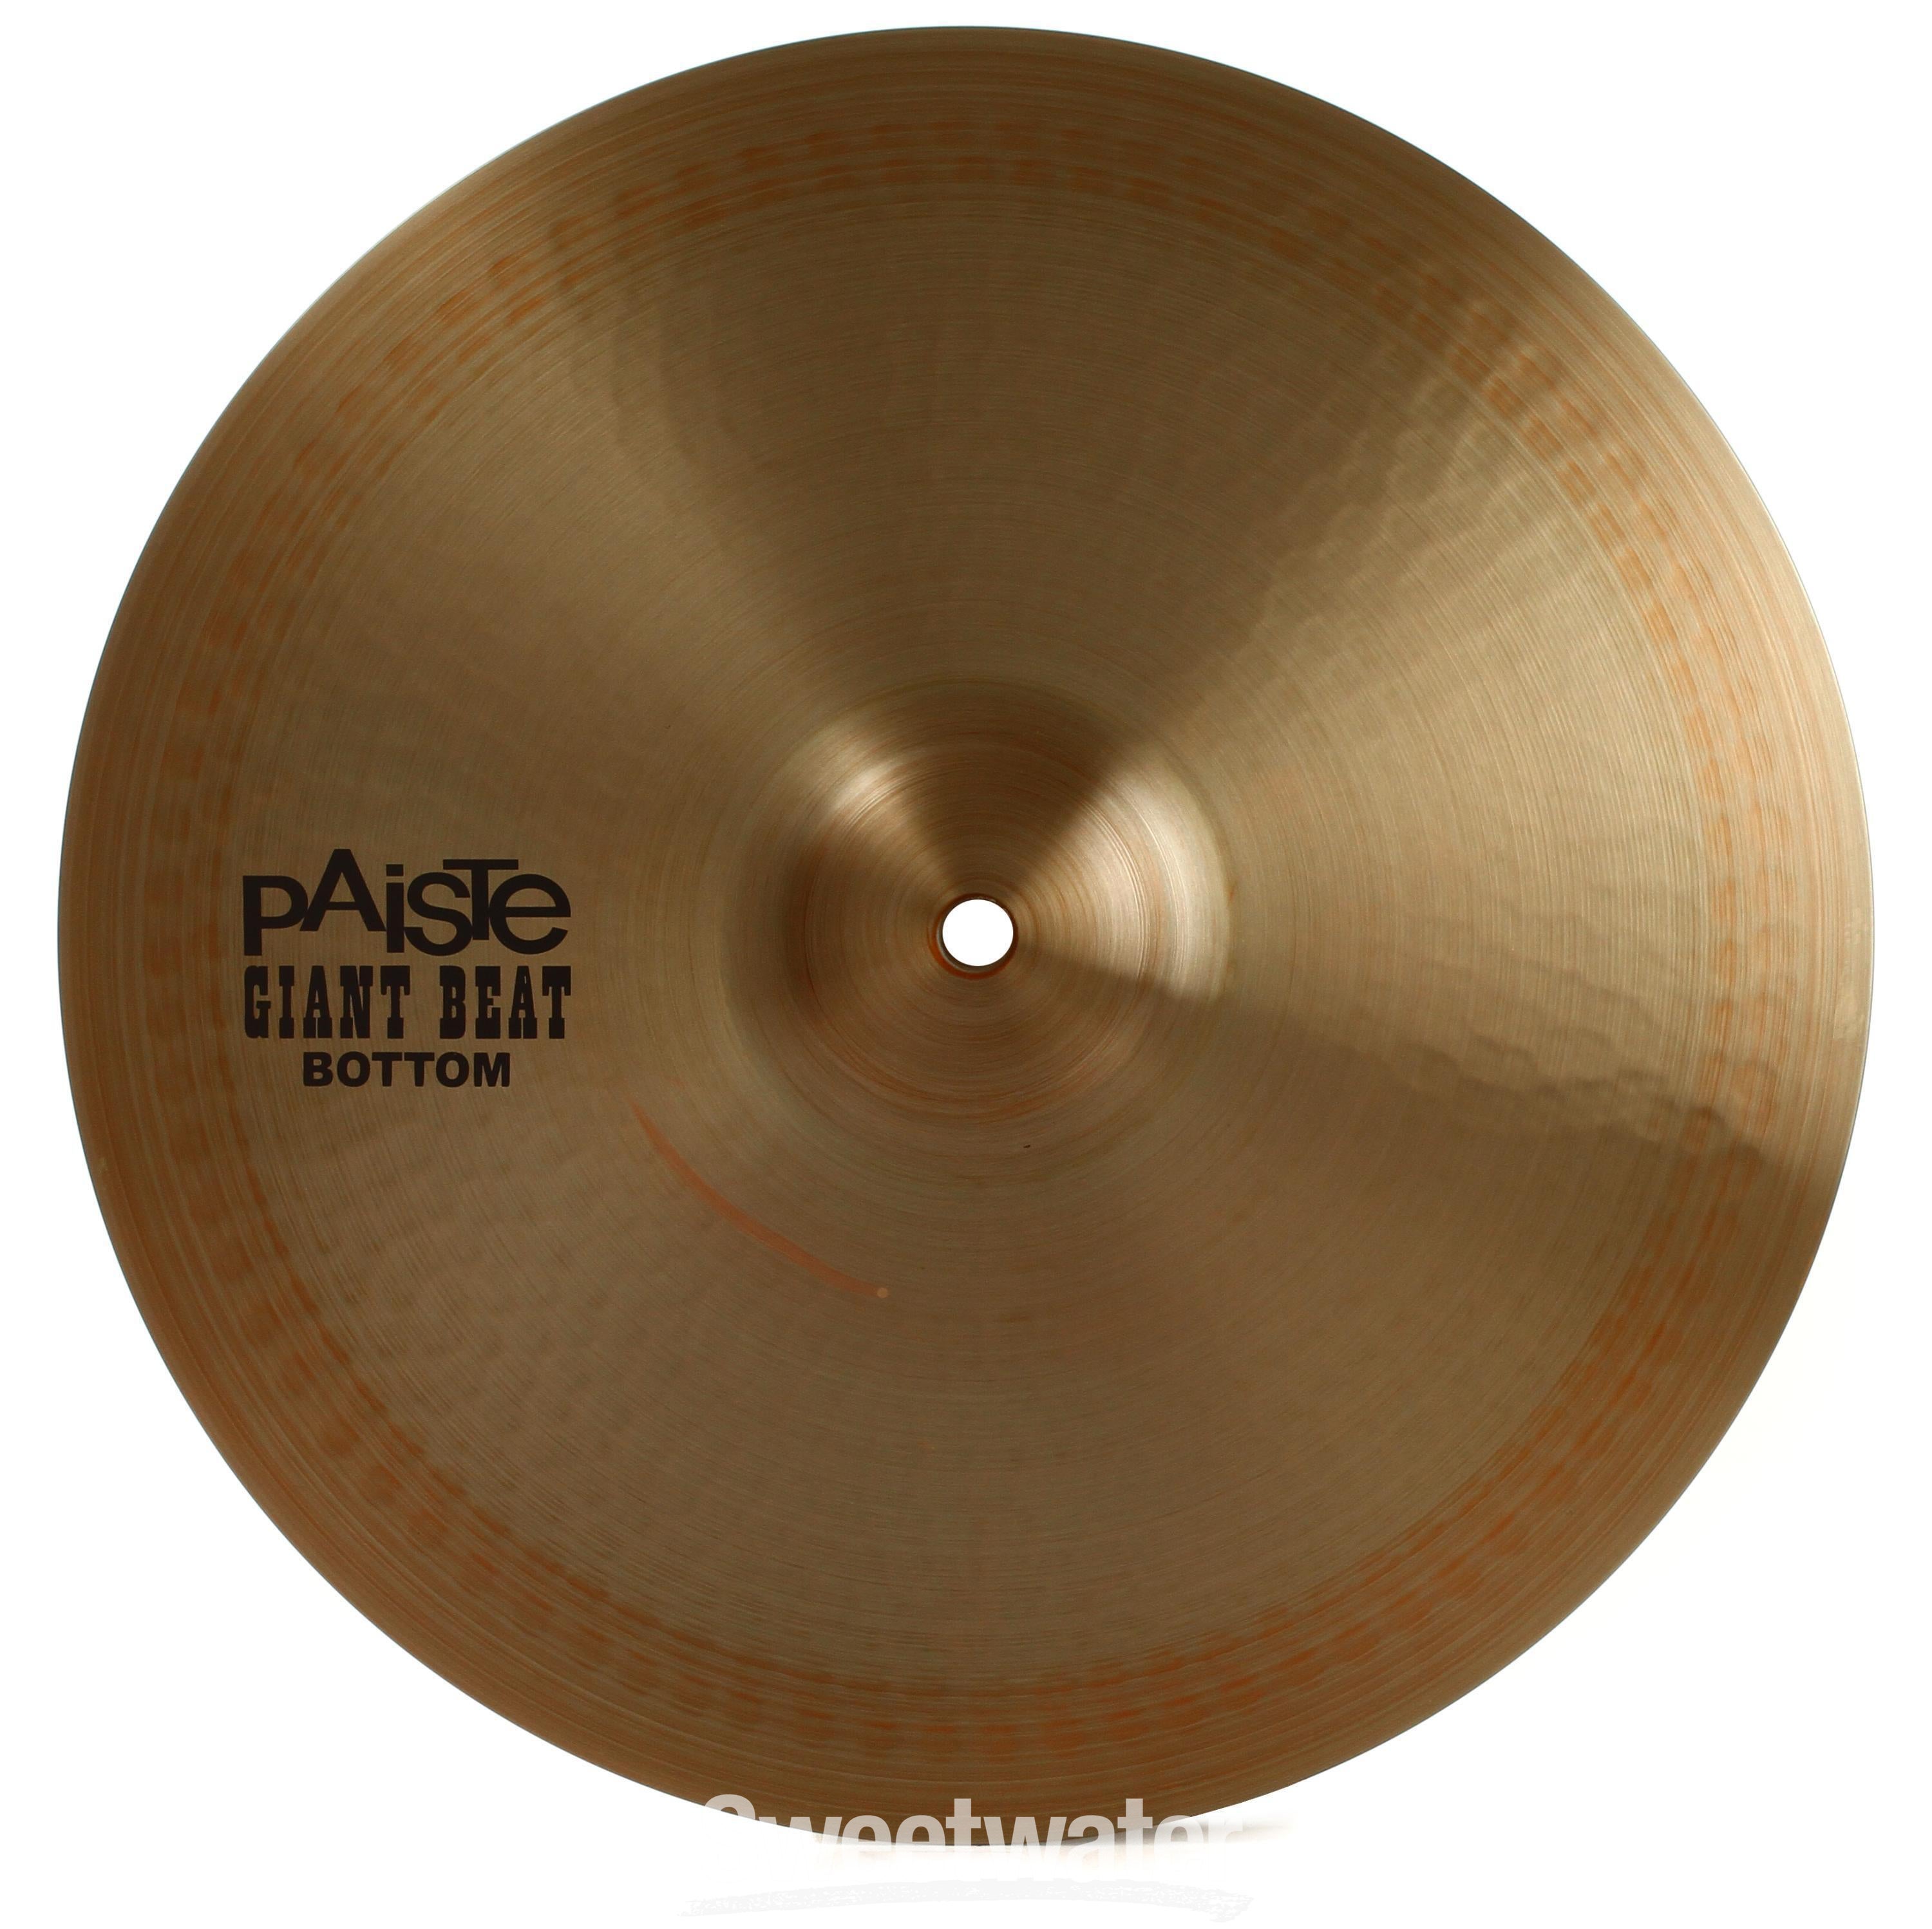 Paiste 15 inch Giant Beat Hi-hat Cymbals | Sweetwater